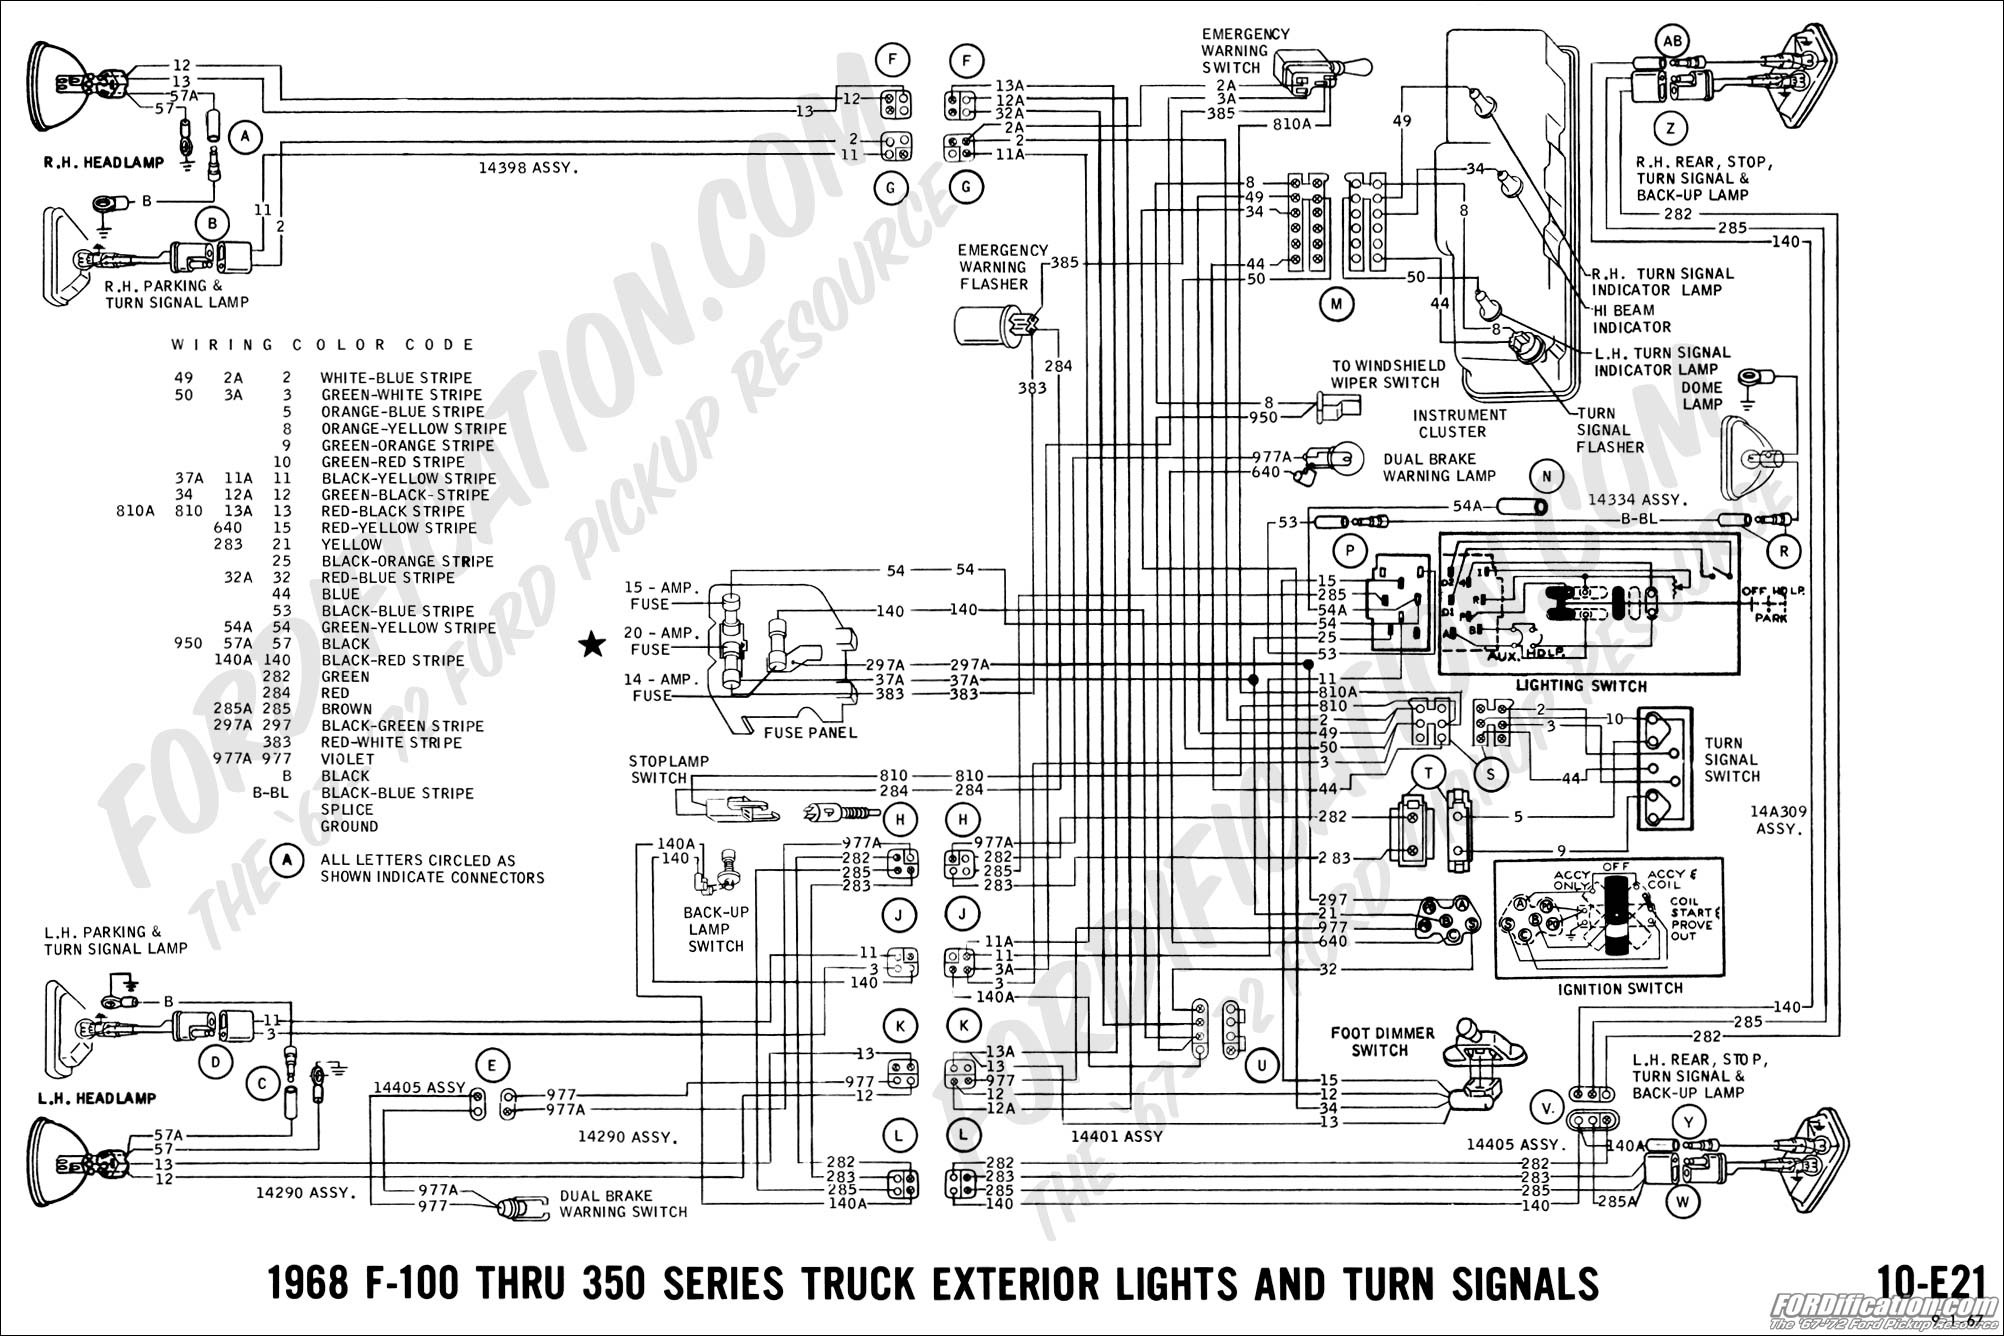 Brake Light Switch Wiring Diagram ford Truck Technical Drawings and Schematics Section H Wiring Of Brake Light Switch Wiring Diagram